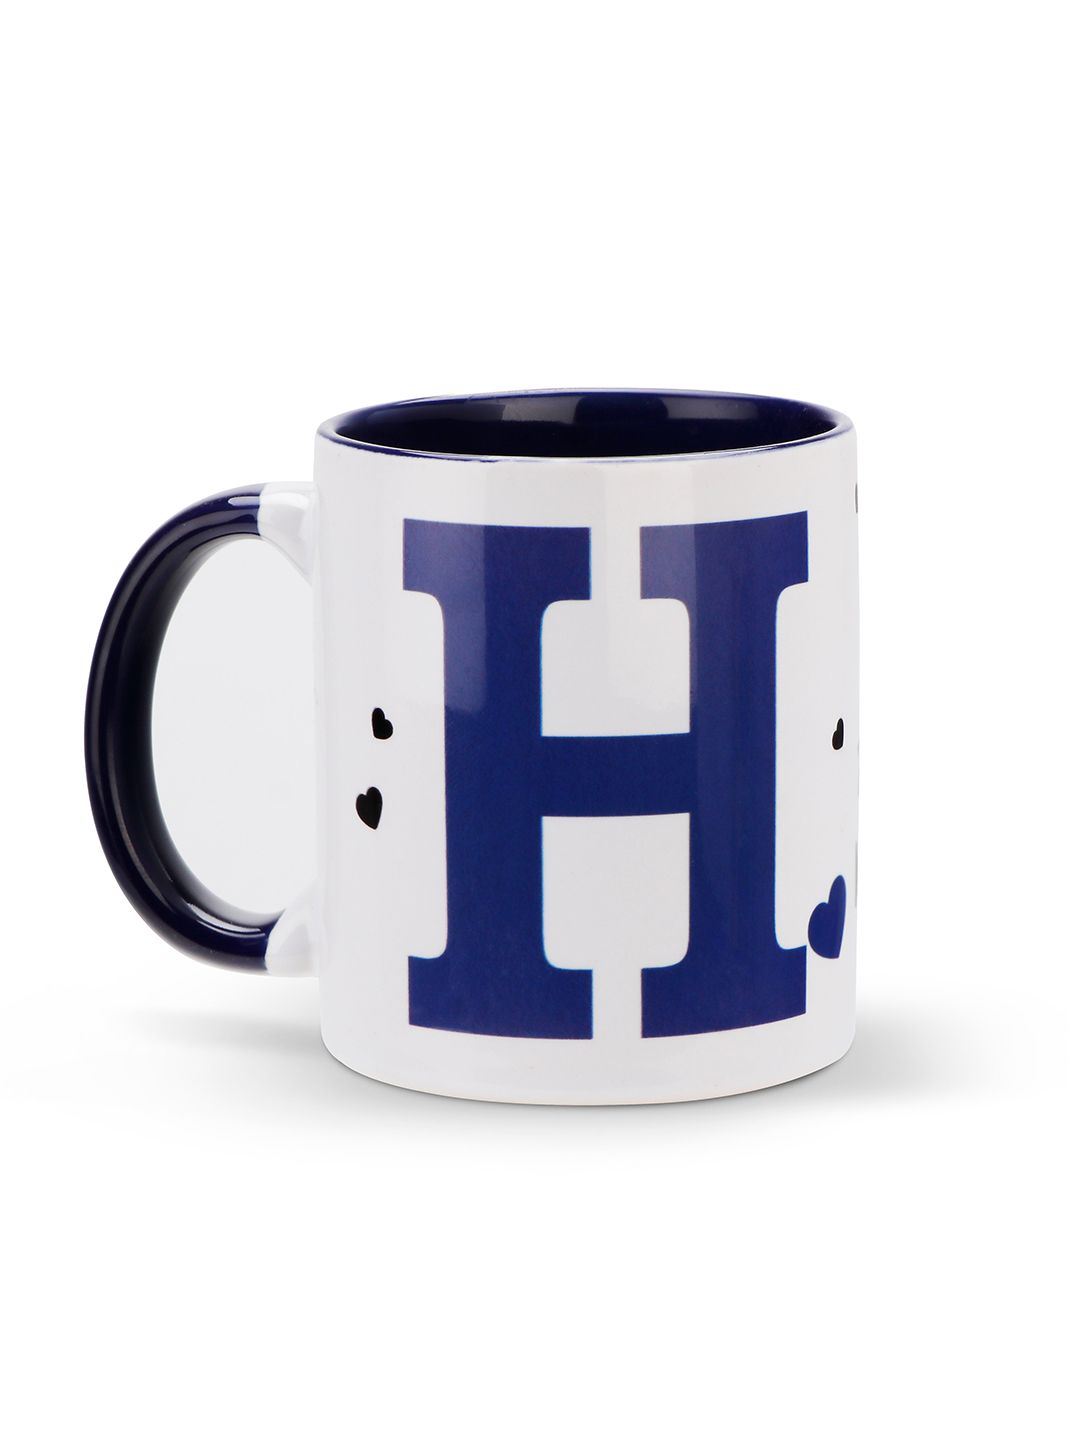 Archies White & Blue Printed Ceramic Glossy Mugs Set of Cups and Mugs Price in India